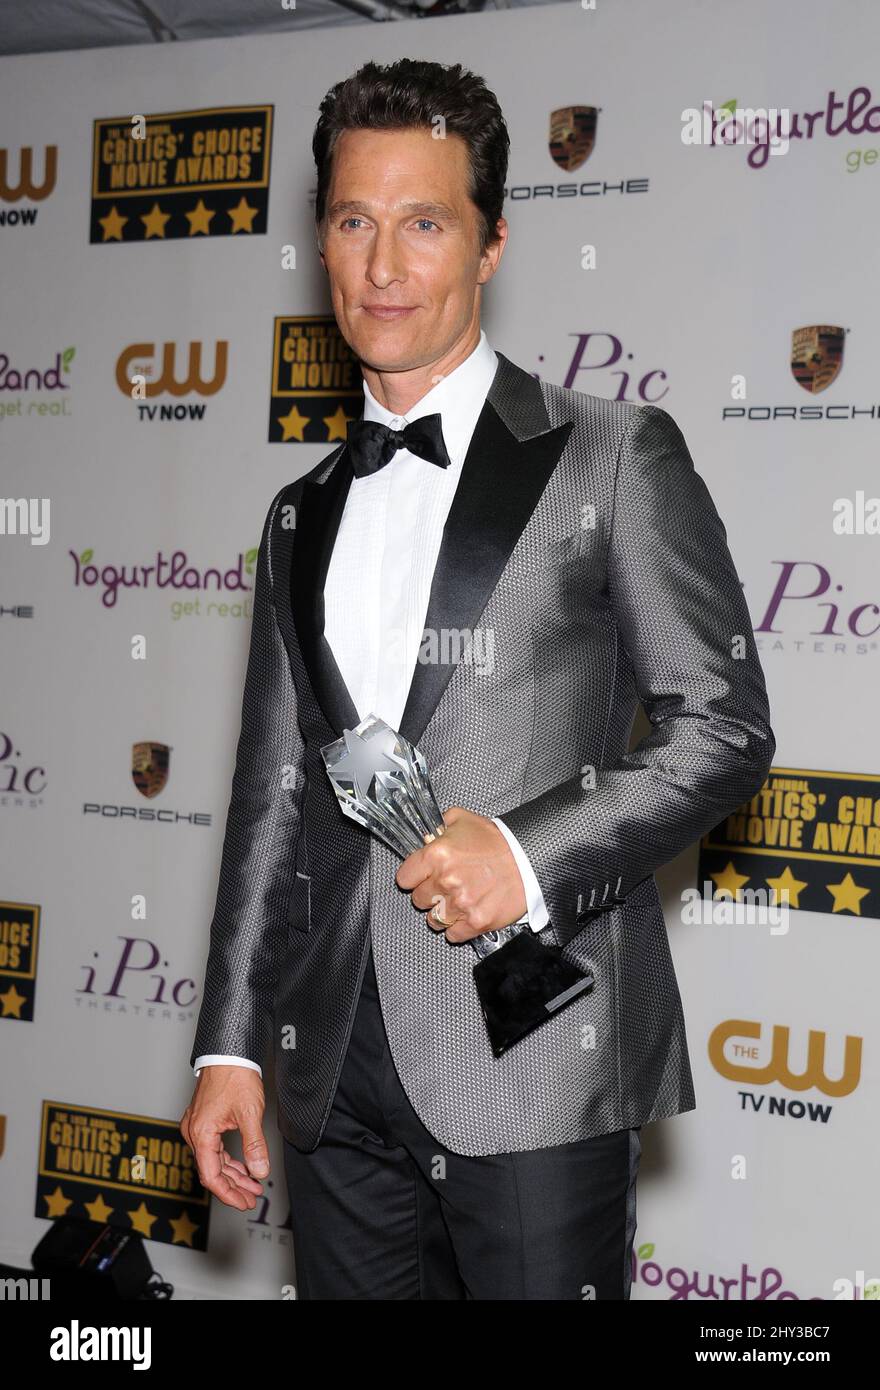 Matthew McConaughey with the award for Best Actor in the press room at the 19th Annual Critics' Choice Movie Awards at Barker Hanger in Los Angeles, USA. Stock Photo